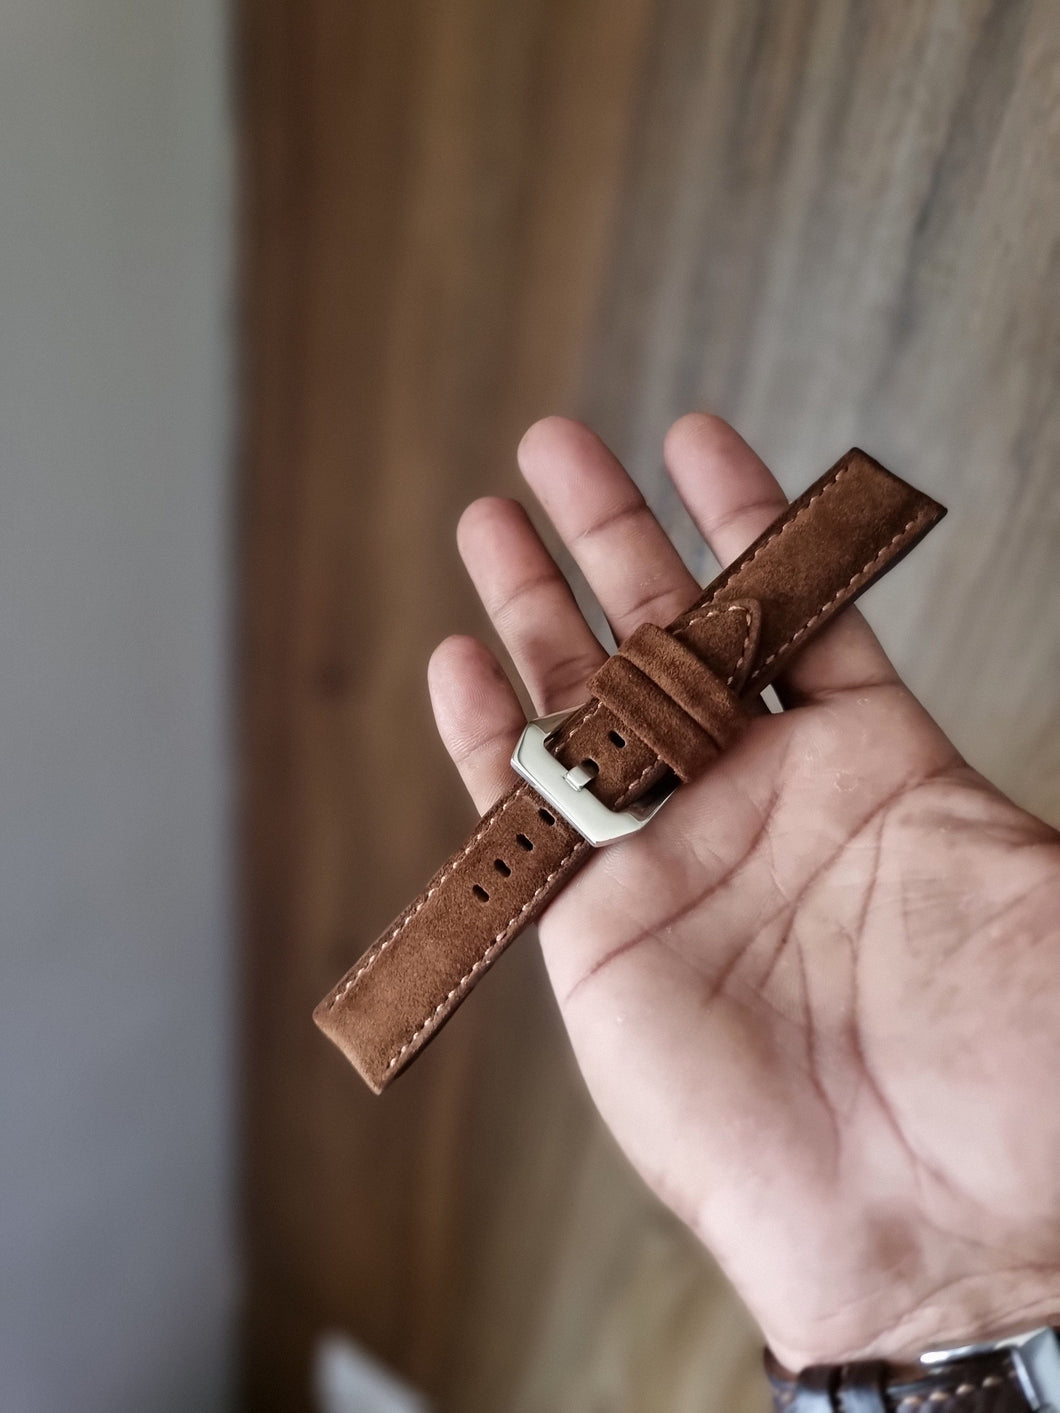 Indianleathercraft Watch Bands 22mm / Brown Suede leather strap for panerai